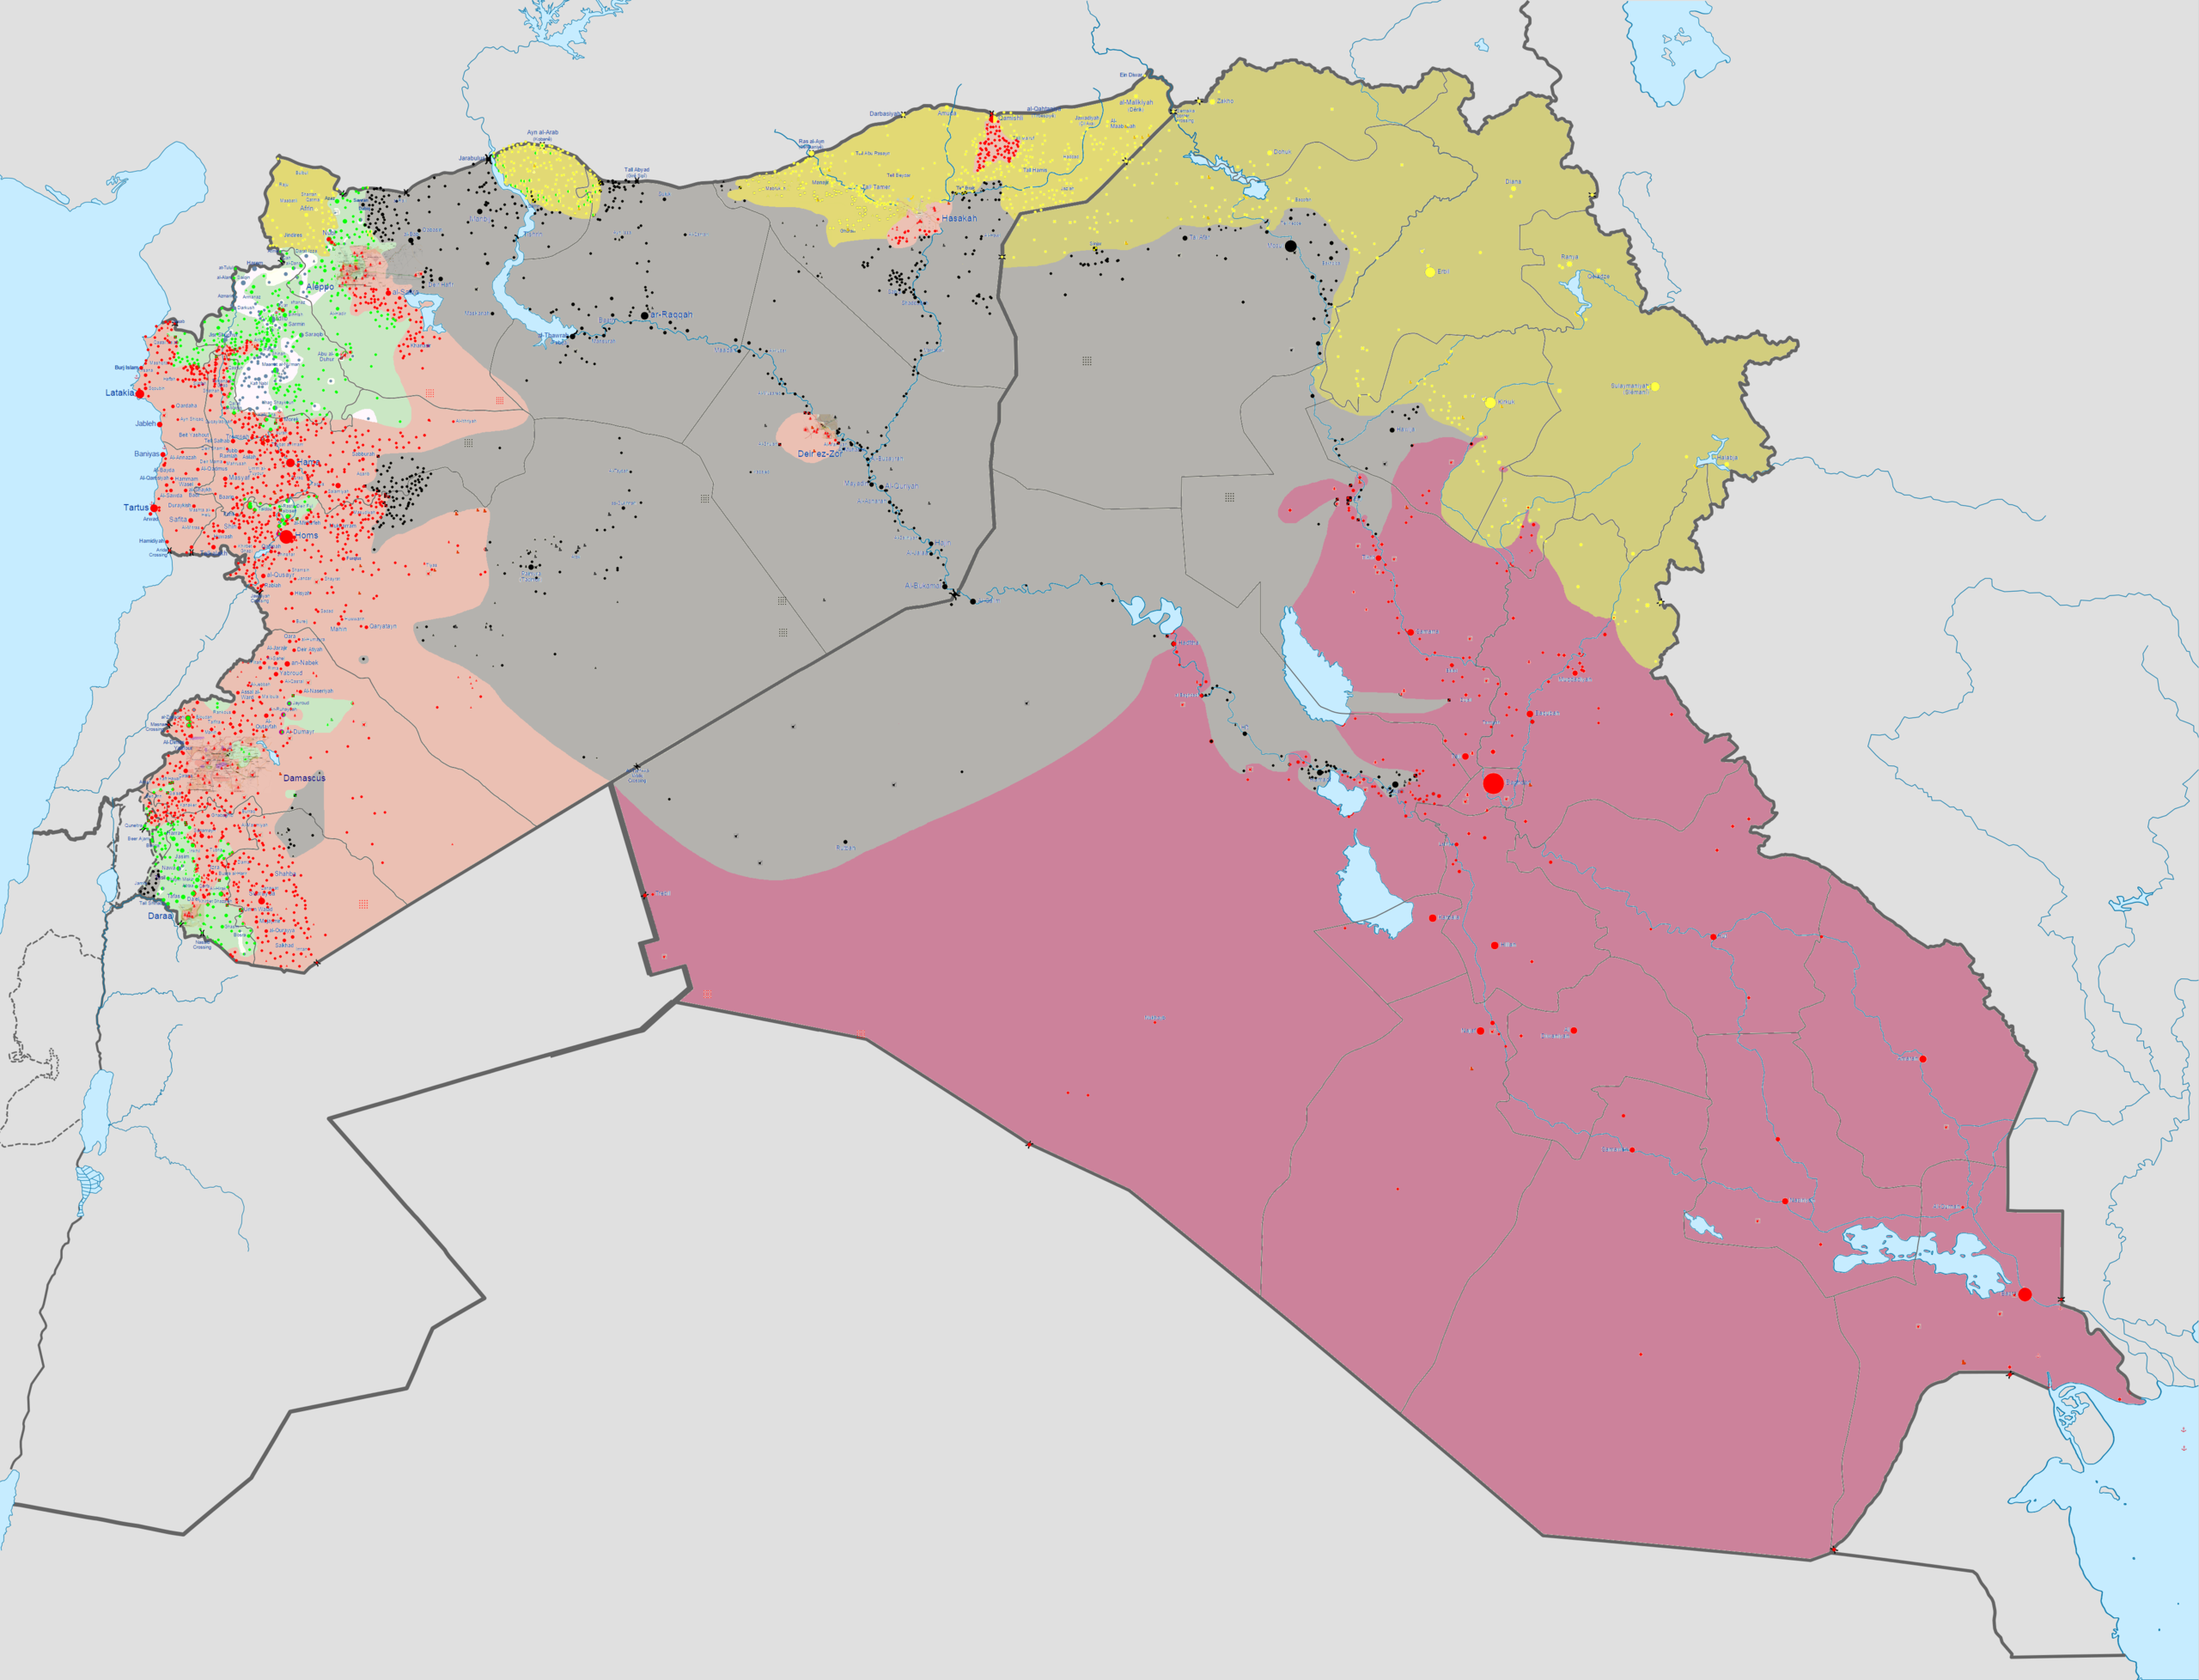 Location of Islamic State